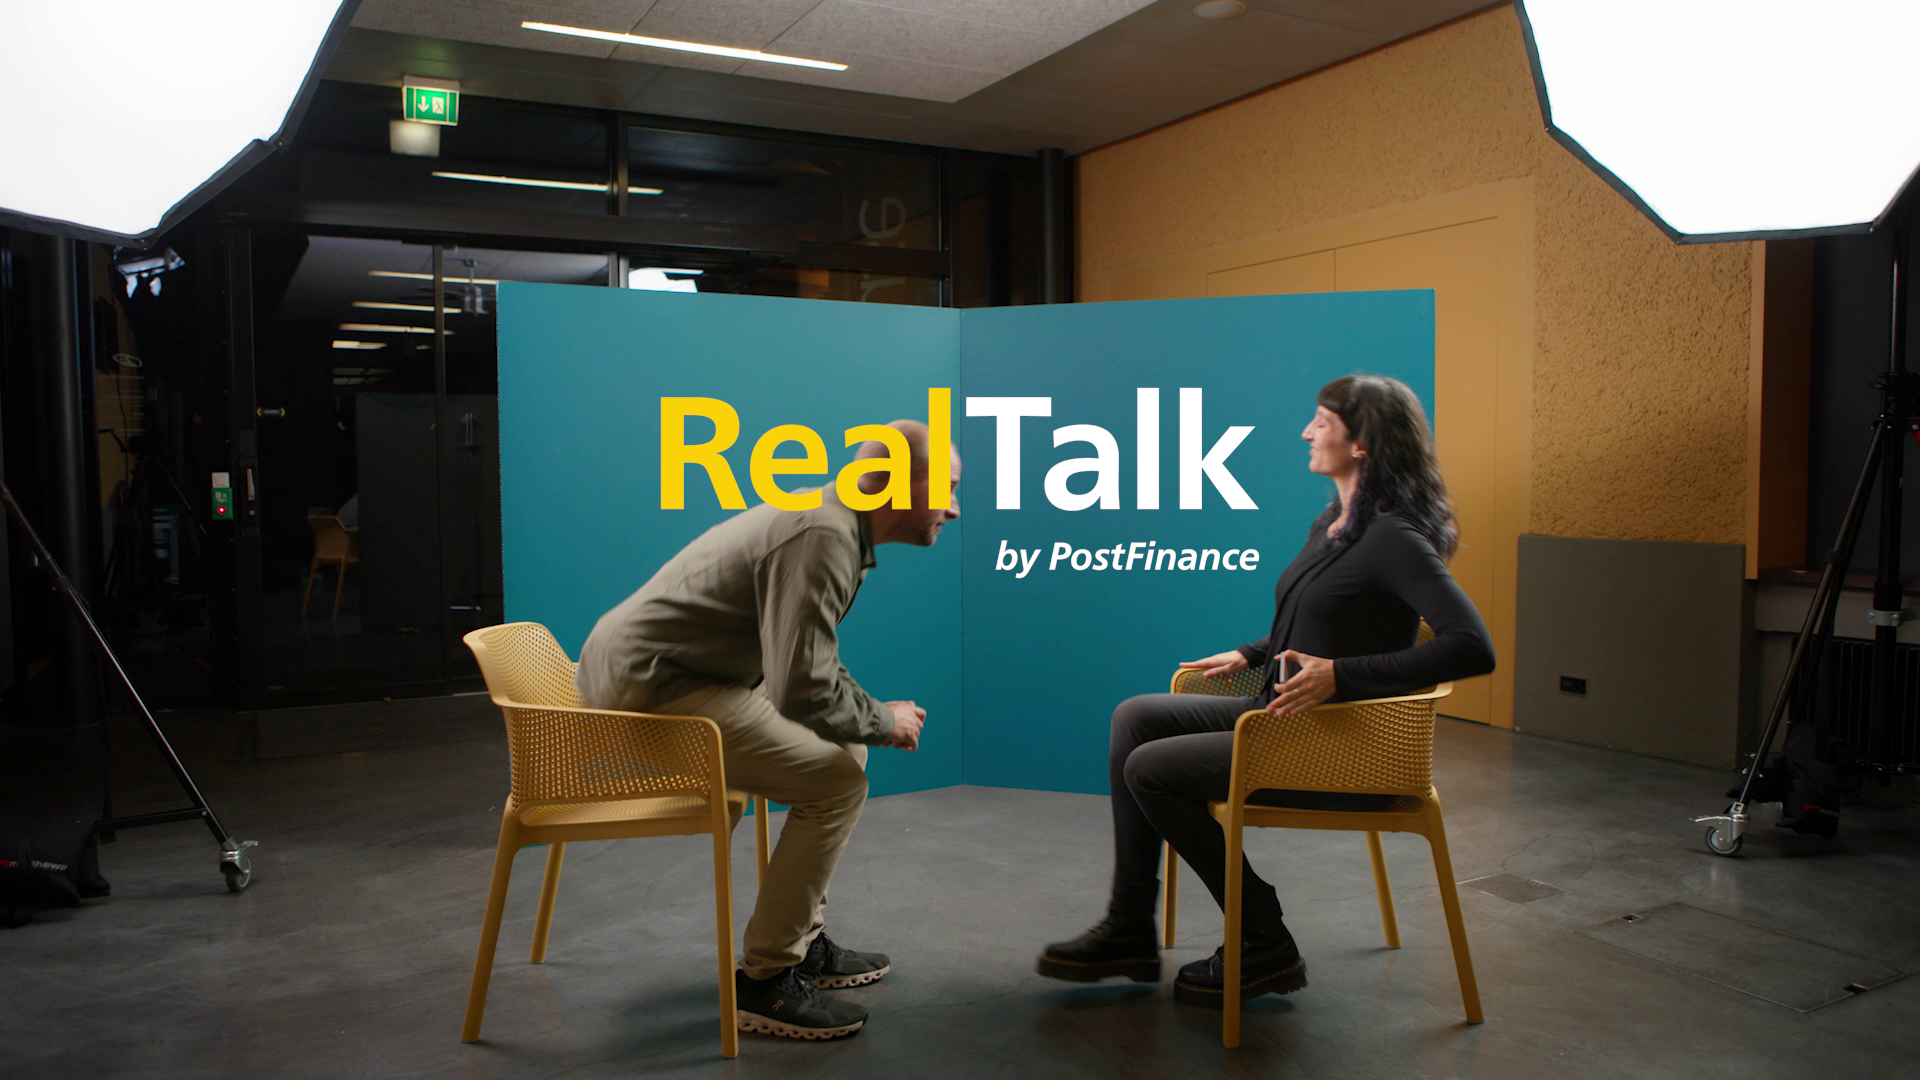 Two people on chairs talking to each other with the caption "Real talk"